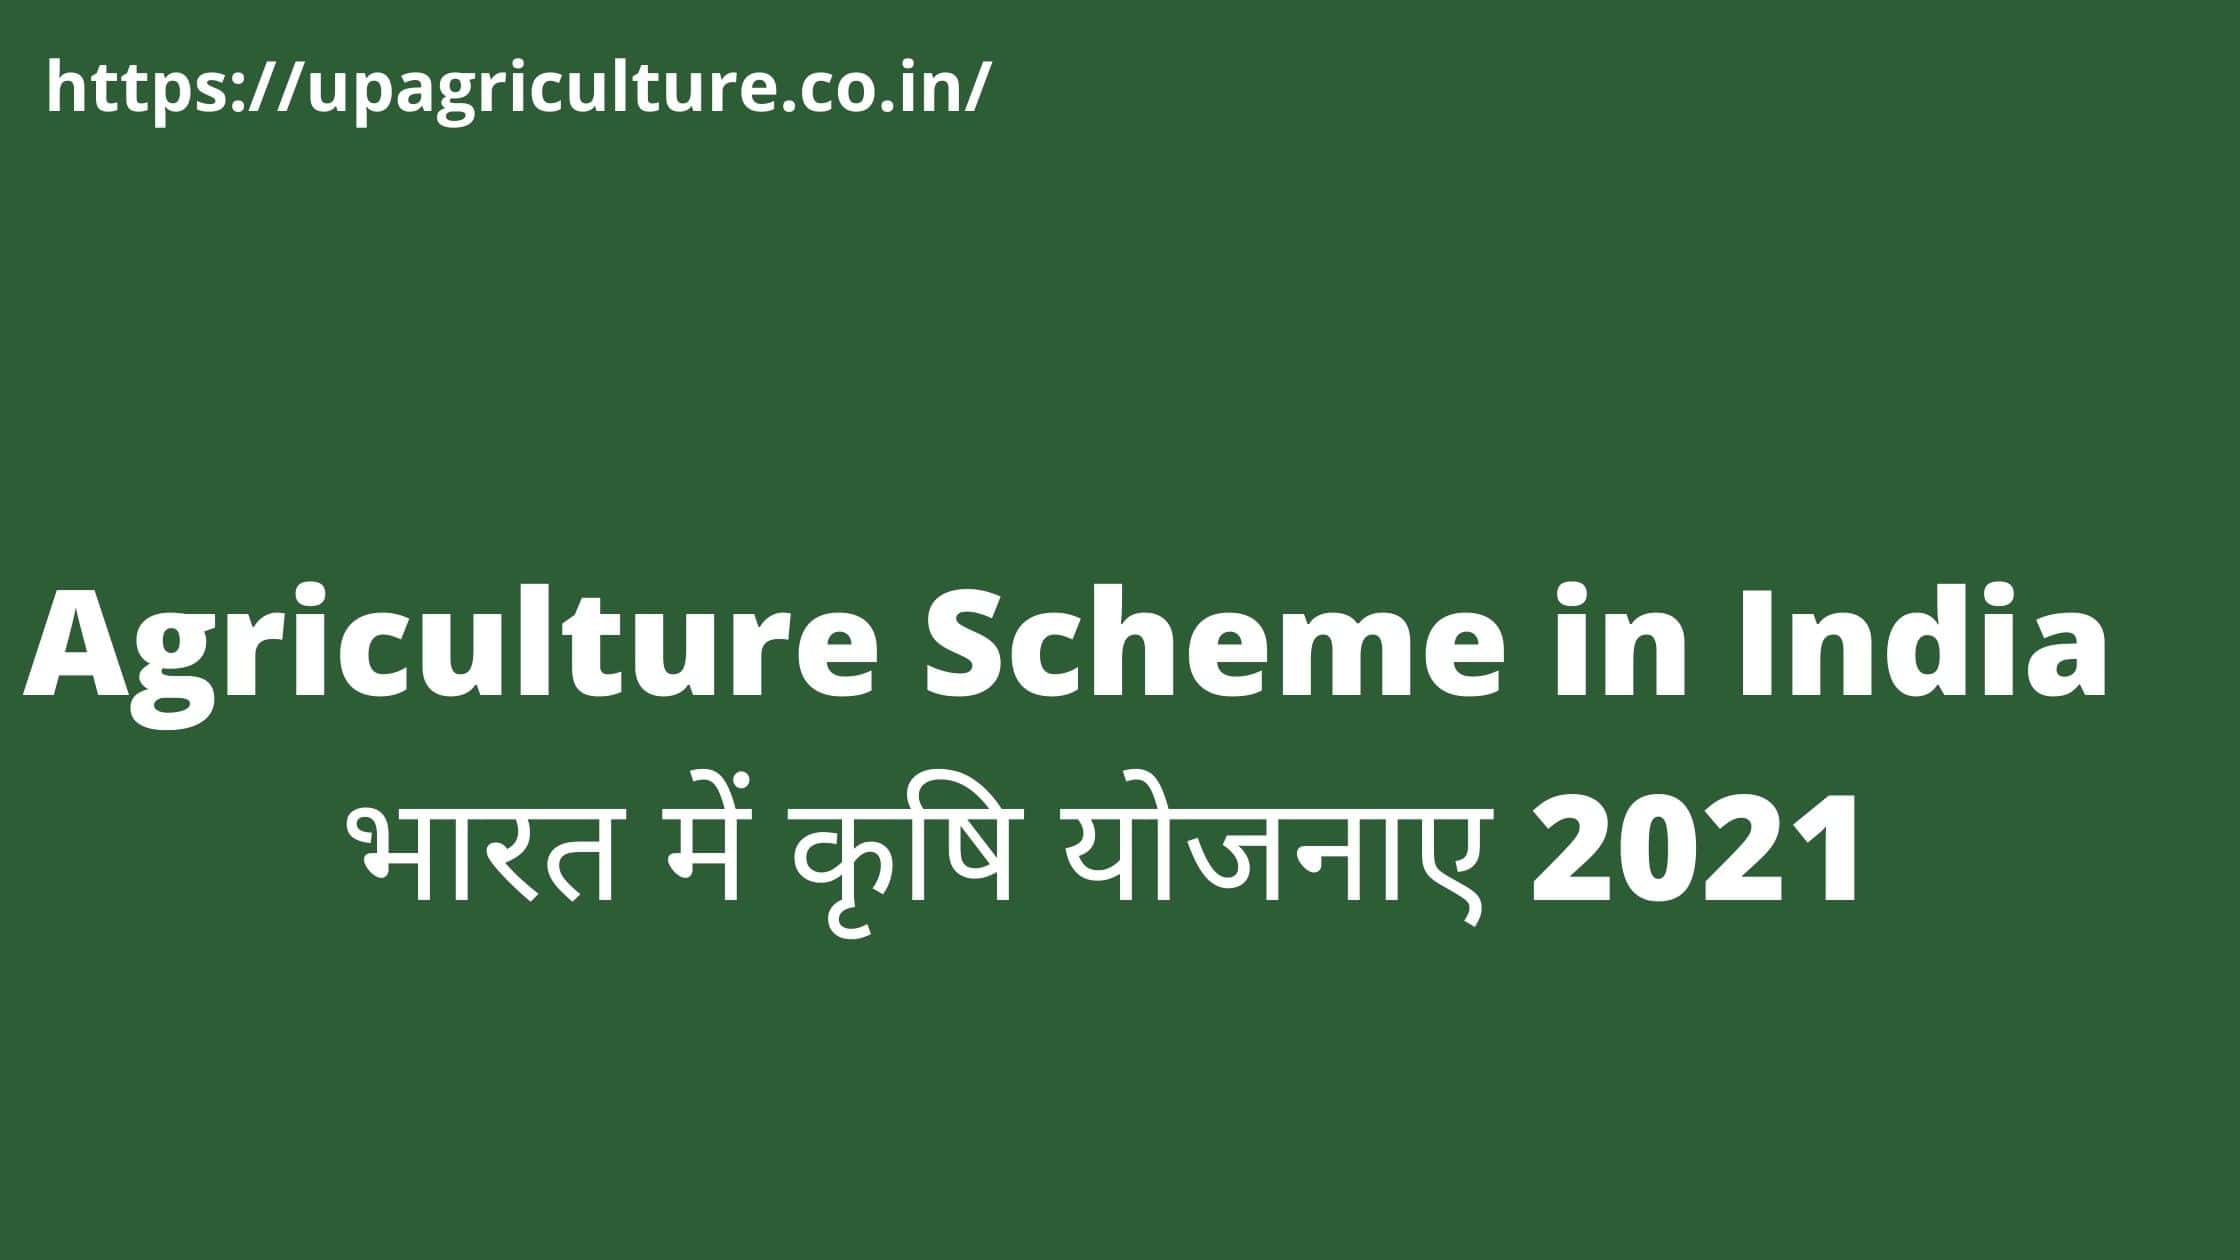 Agriculture Scheme in India